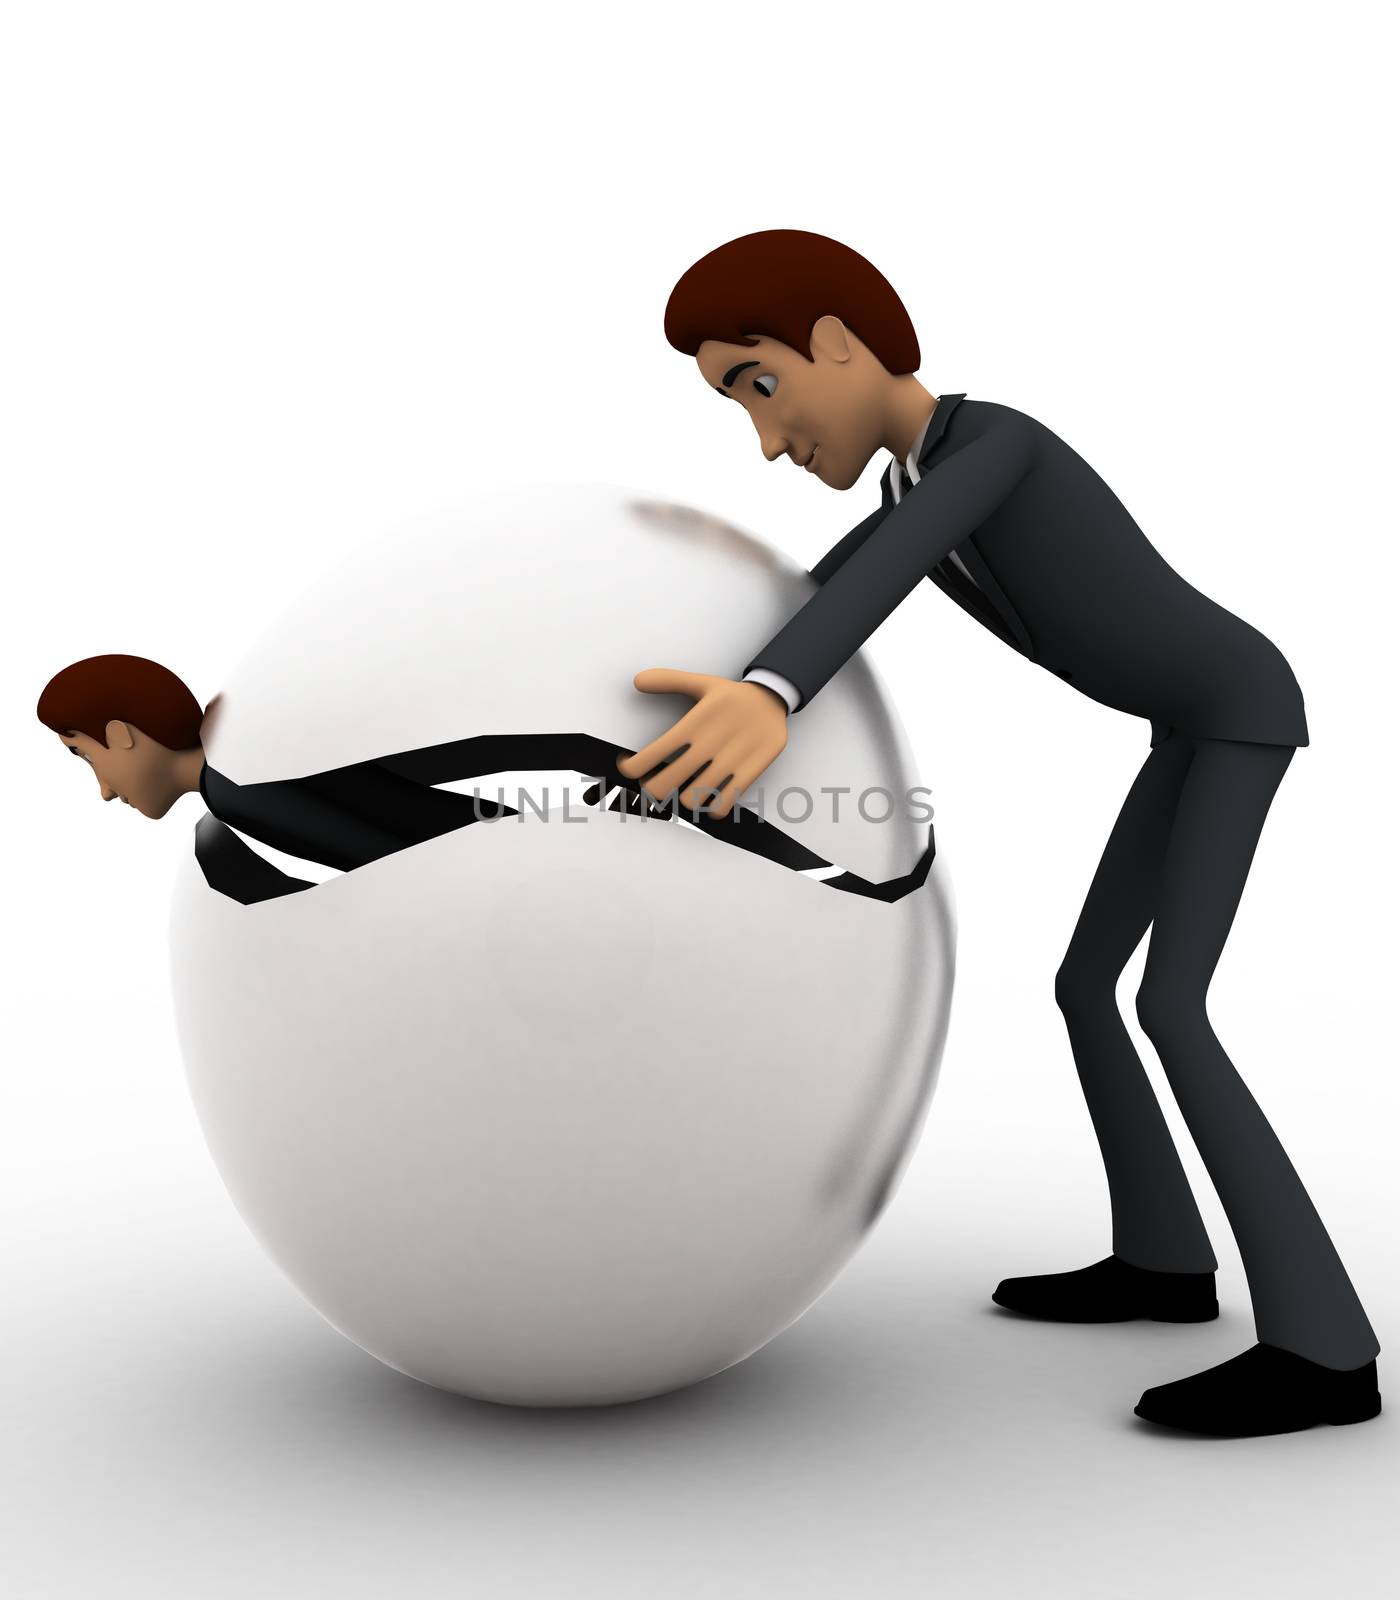 3d man try to hide body inside sphere concept by touchmenithin@gmail.com